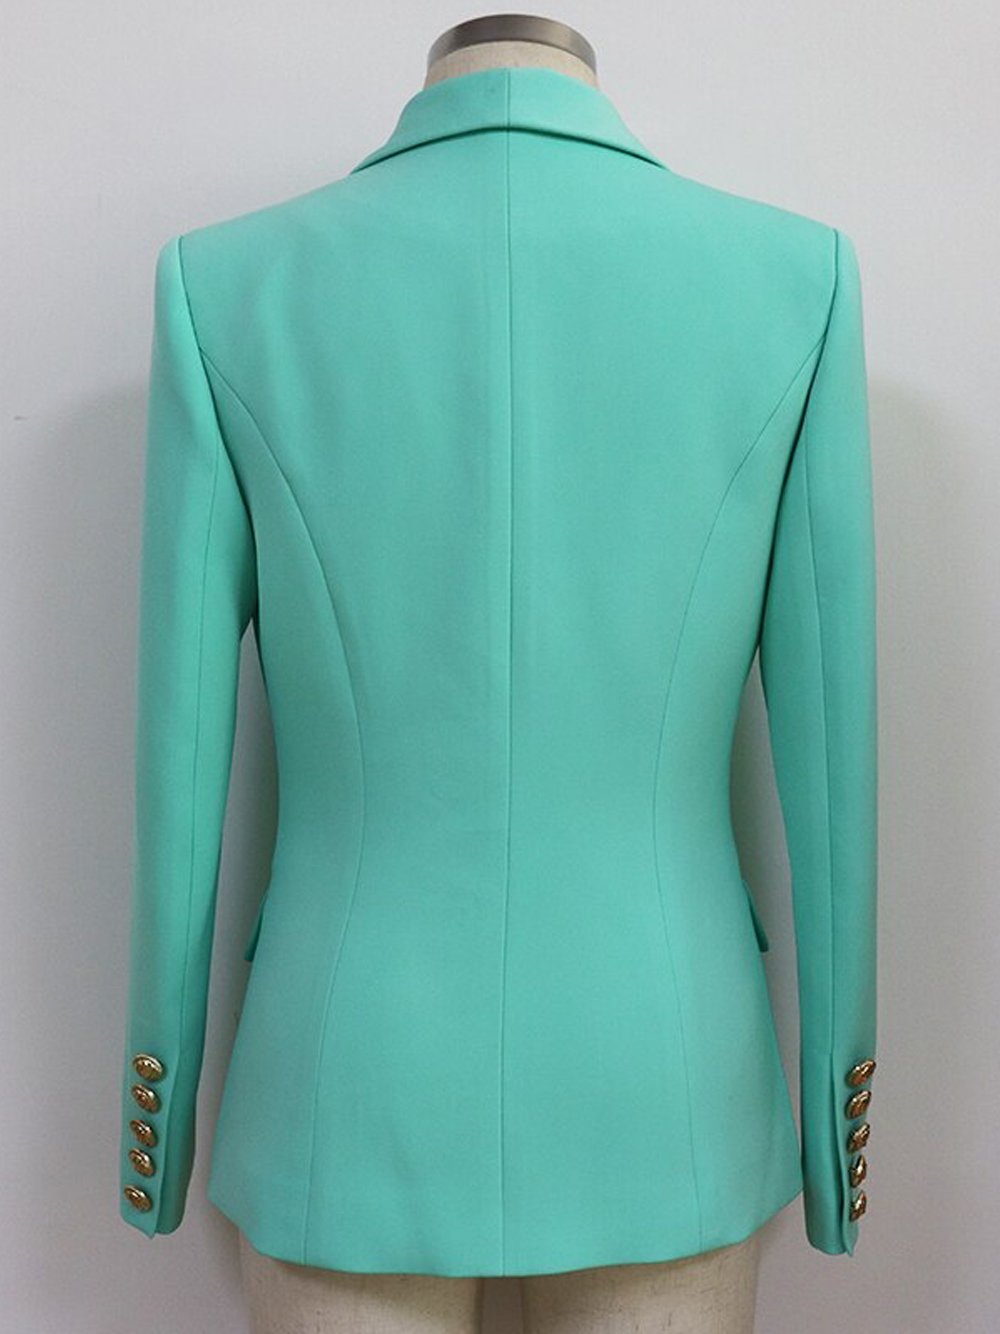 Oversized Double Breasted Mint Blazer